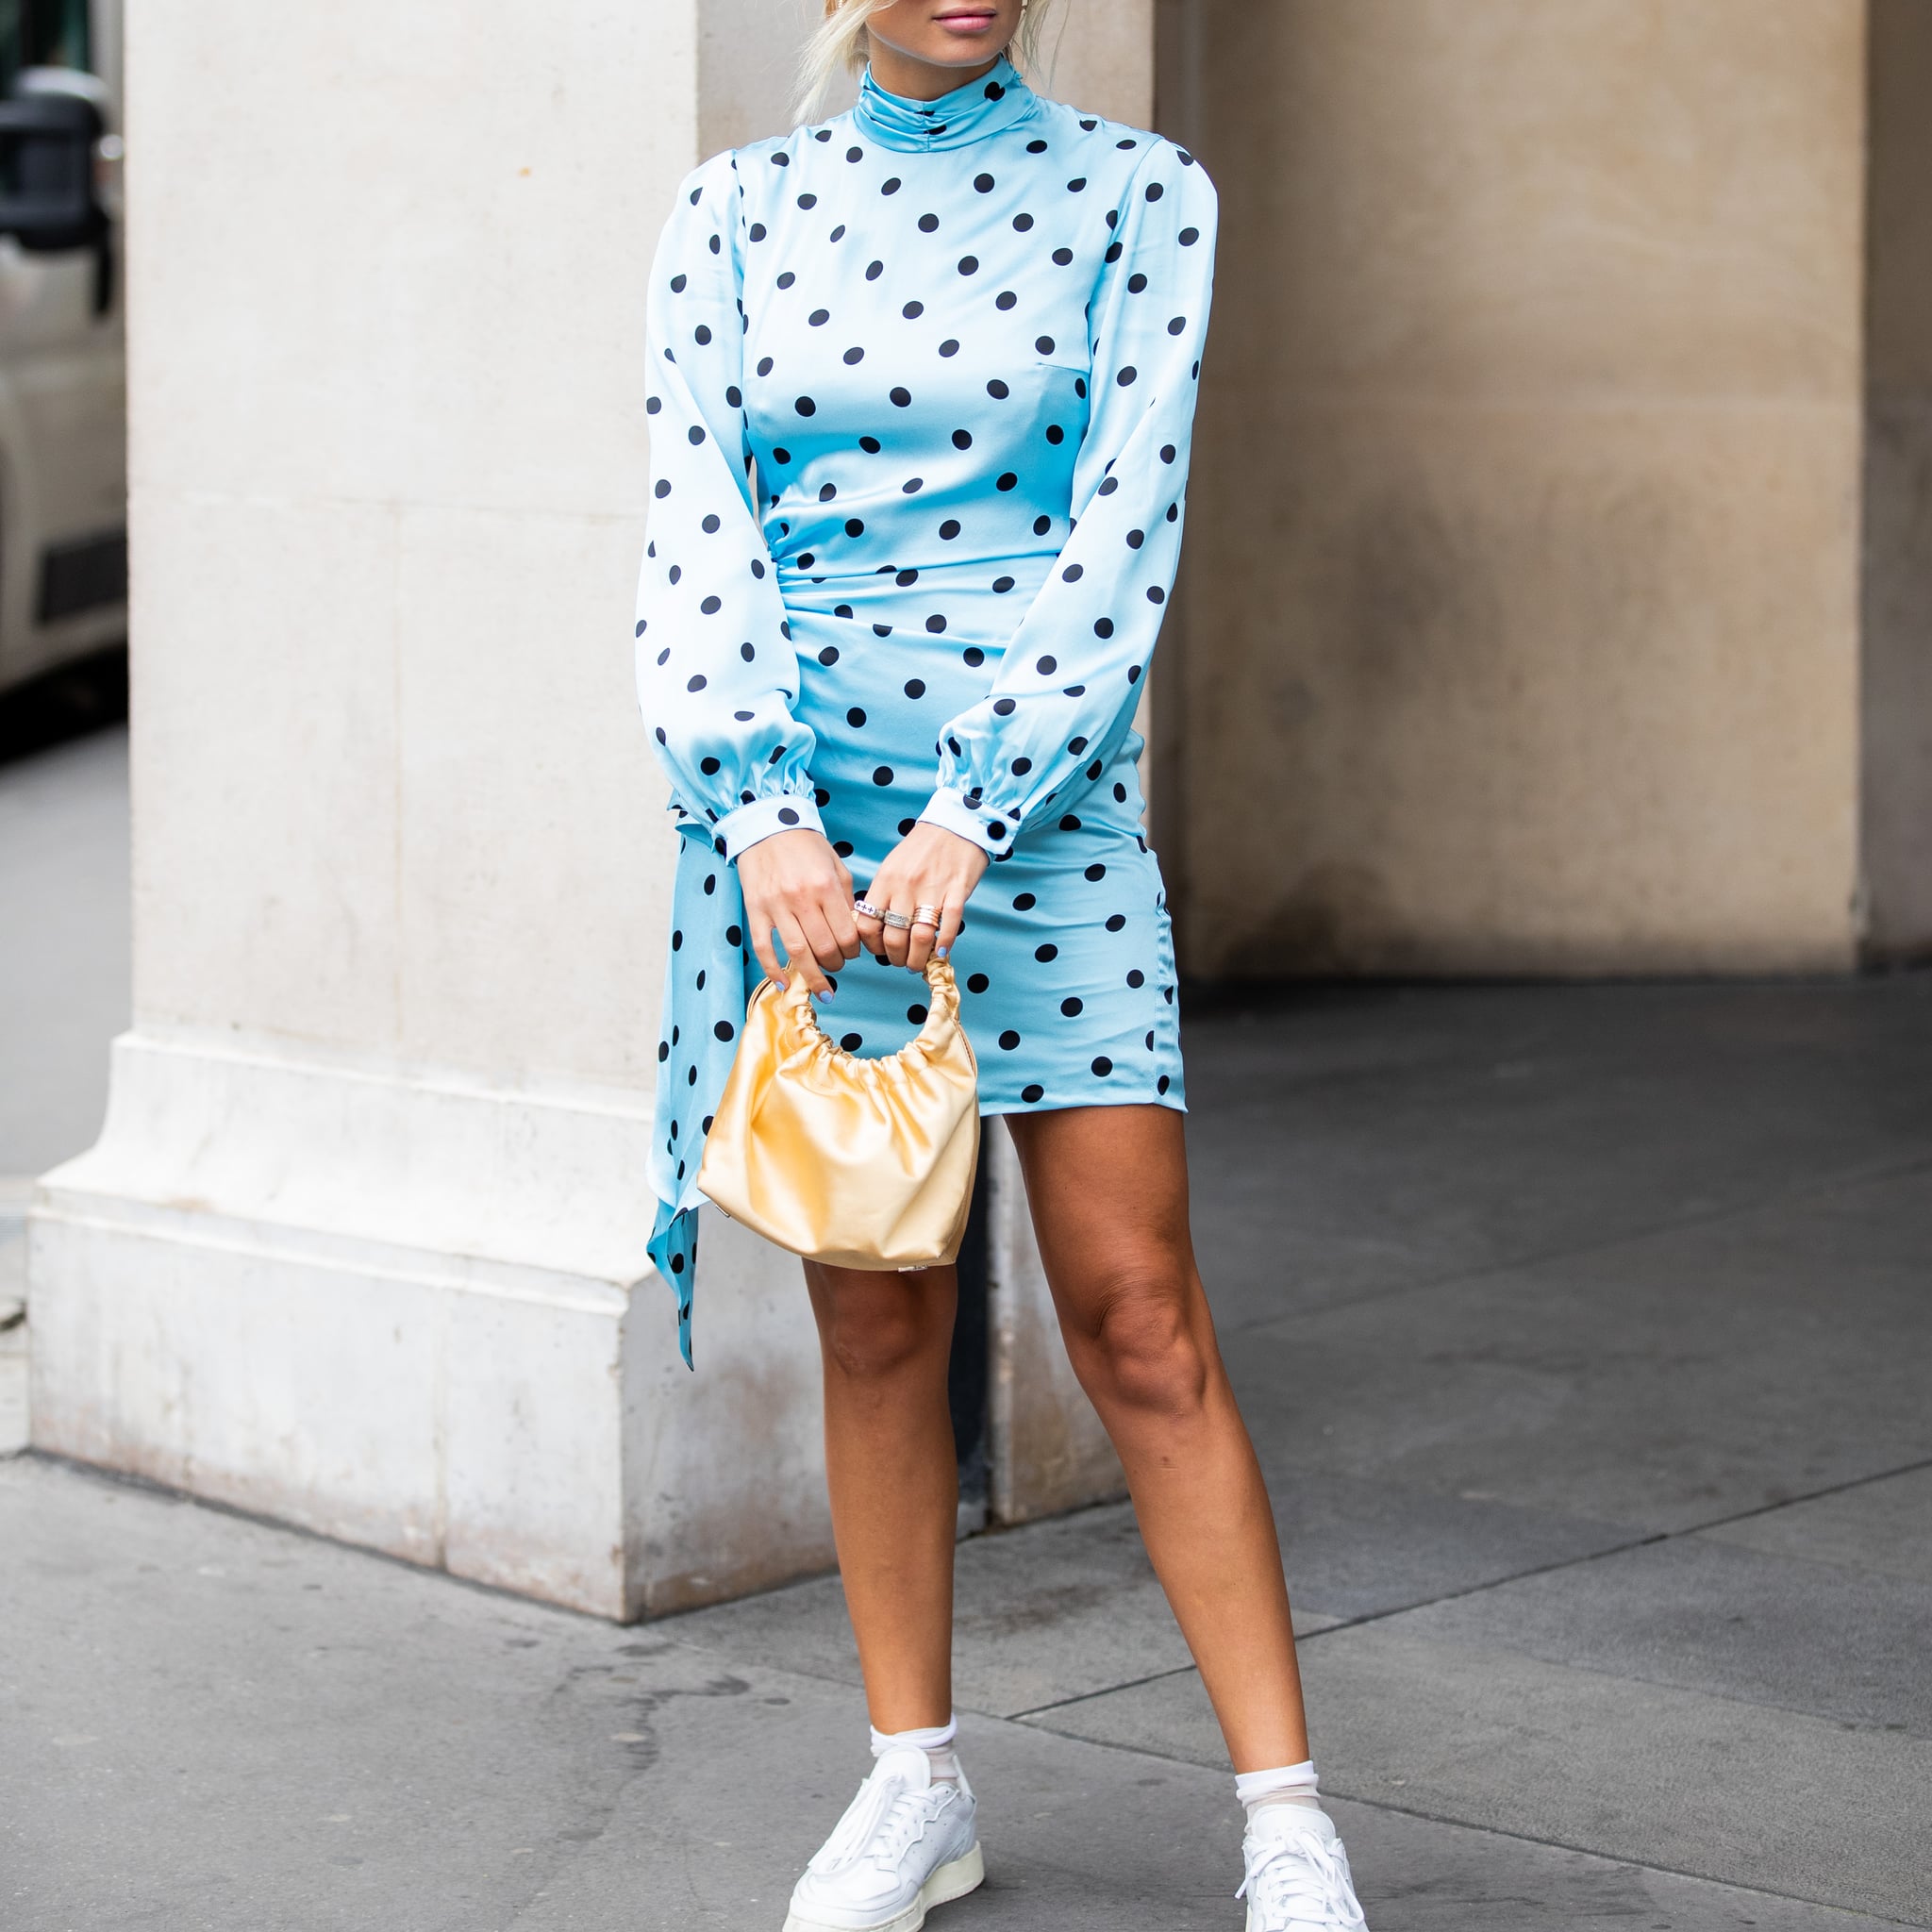 Polka Dots Are Taking Over Street Style